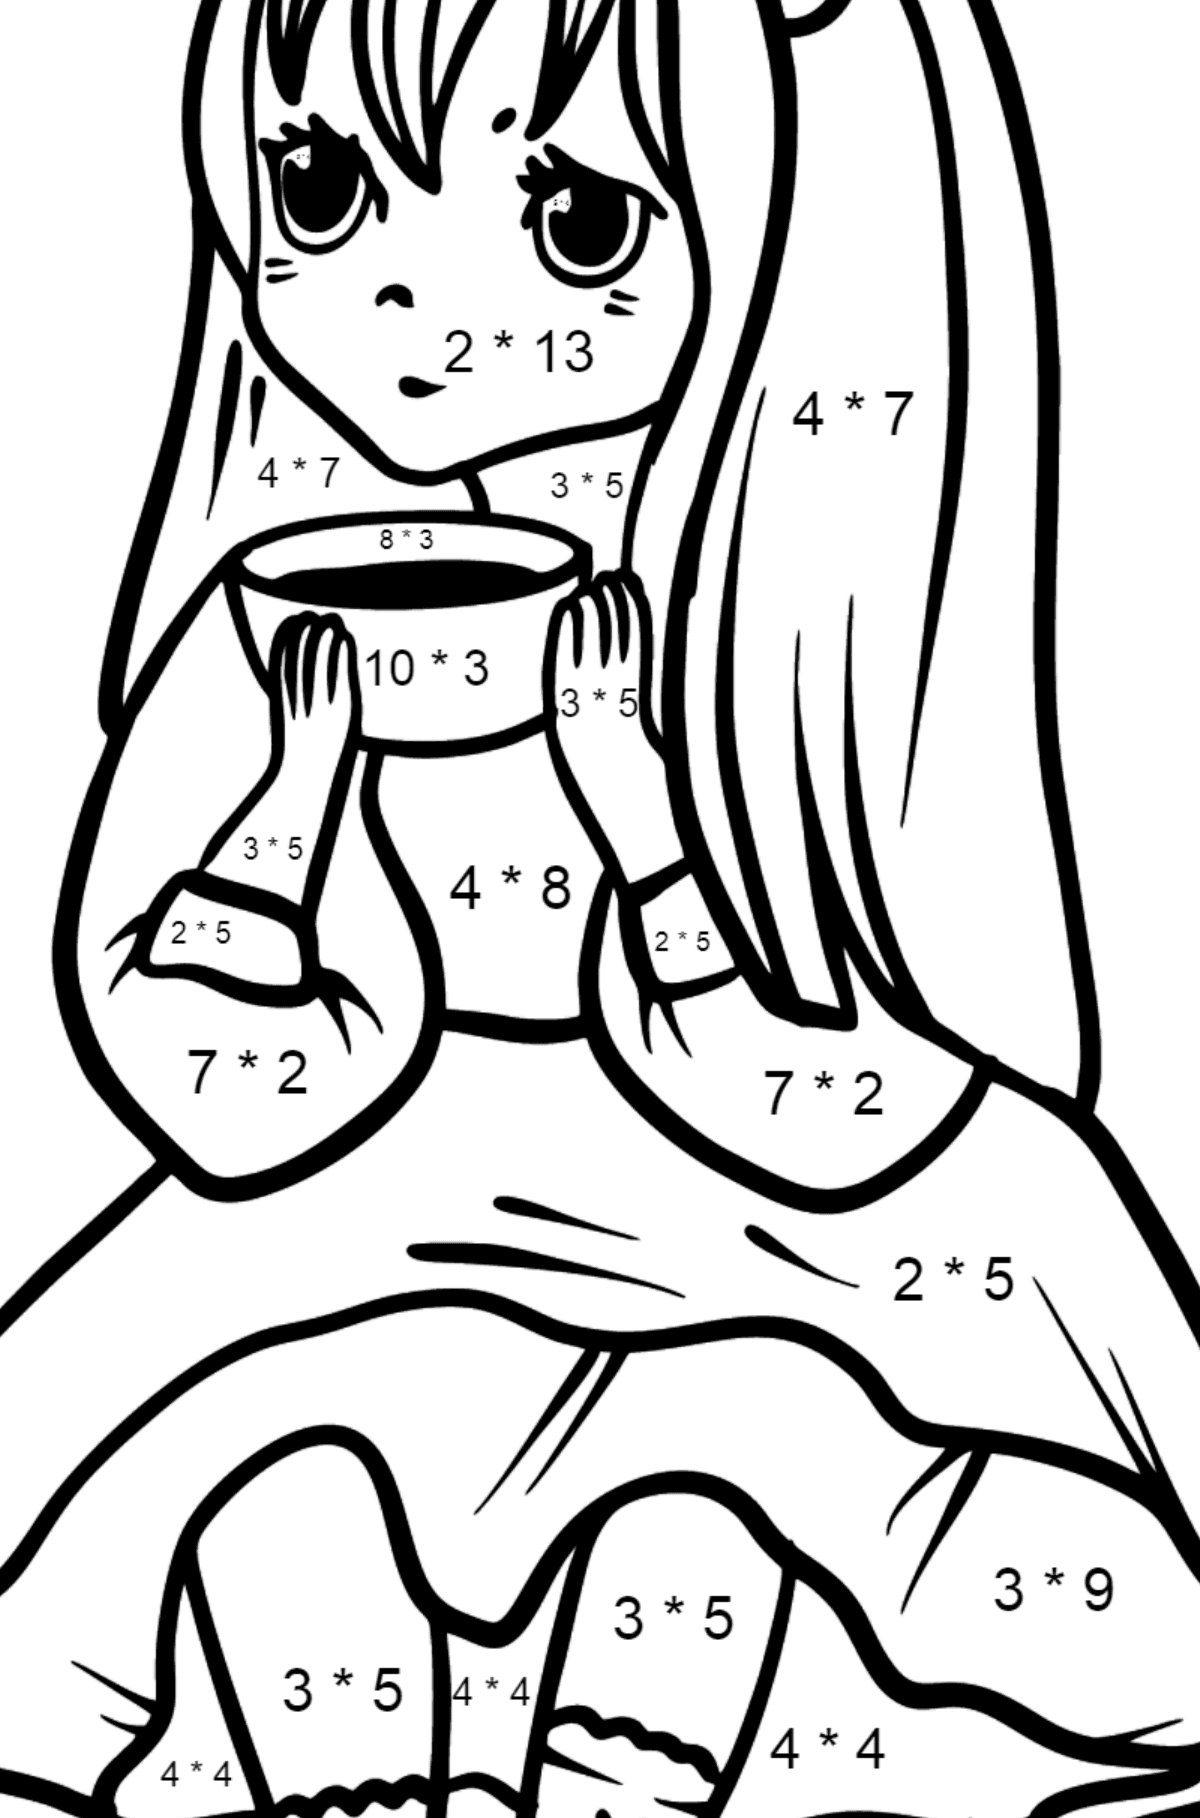 Anime Girl Drinking Coffee coloring page - Math Coloring - Multiplication for Kids